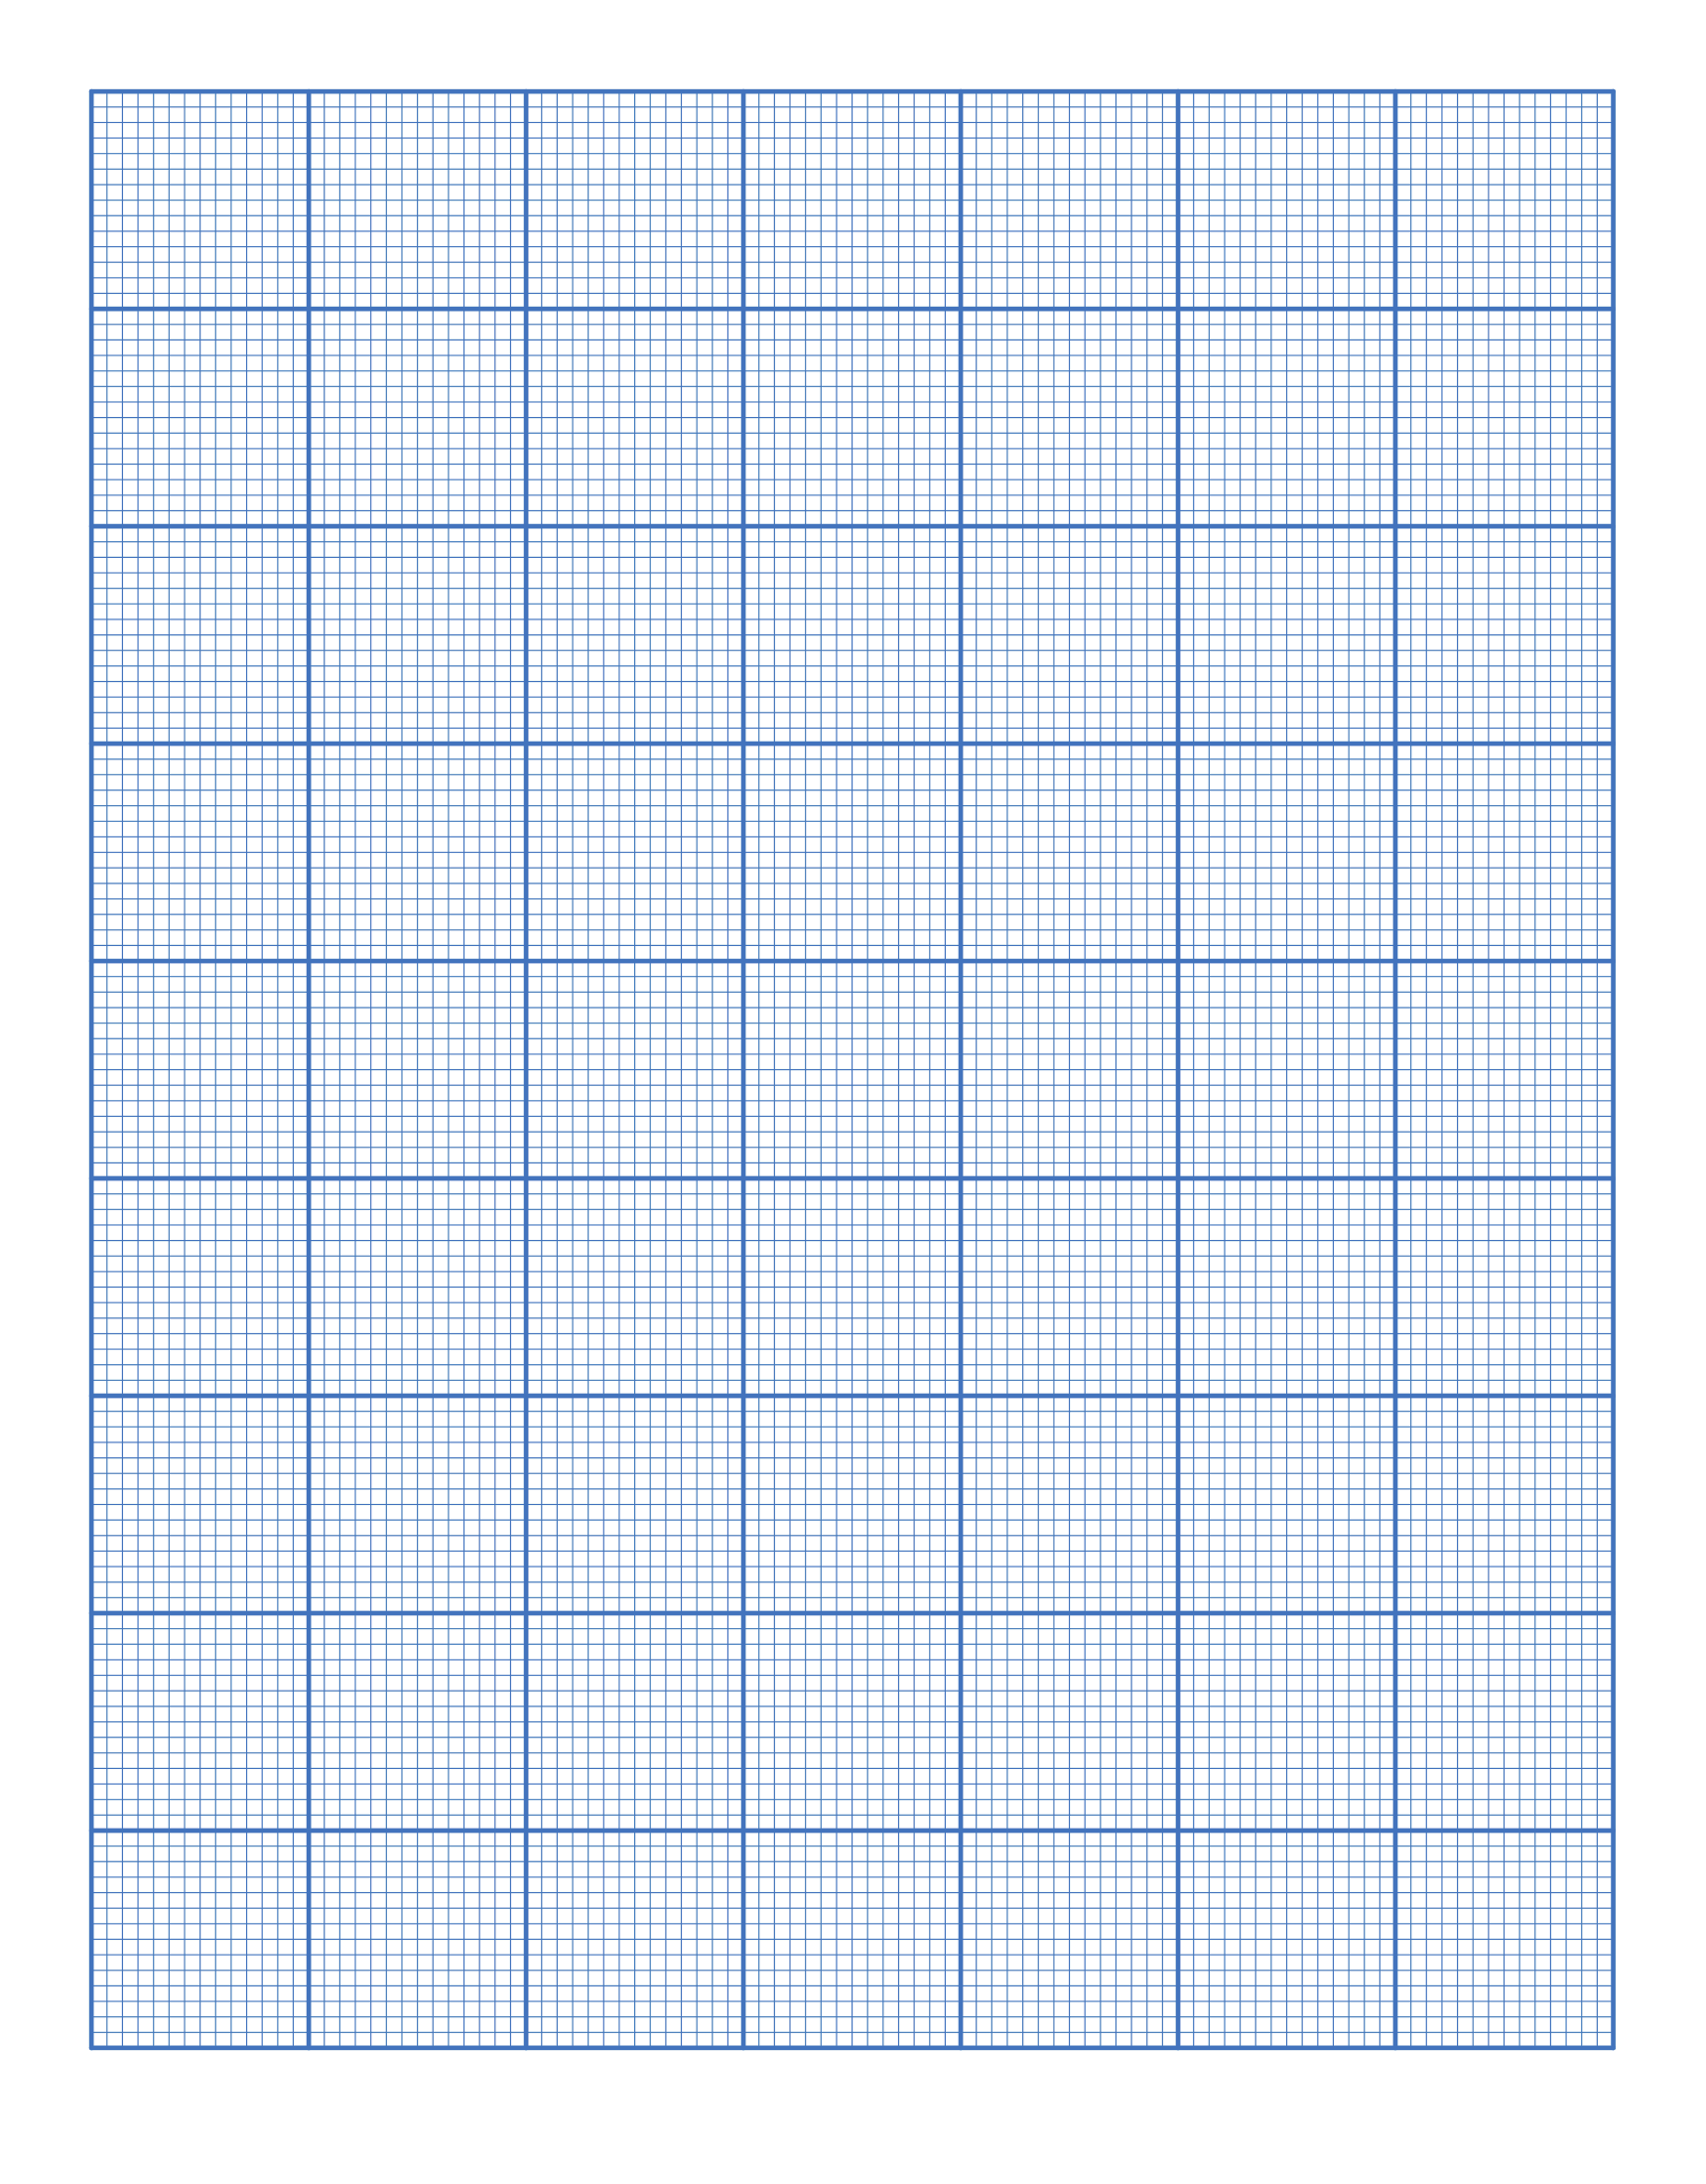 Graph Paper: Full Page Grid - 14x19boxes - half inch squares - no name line